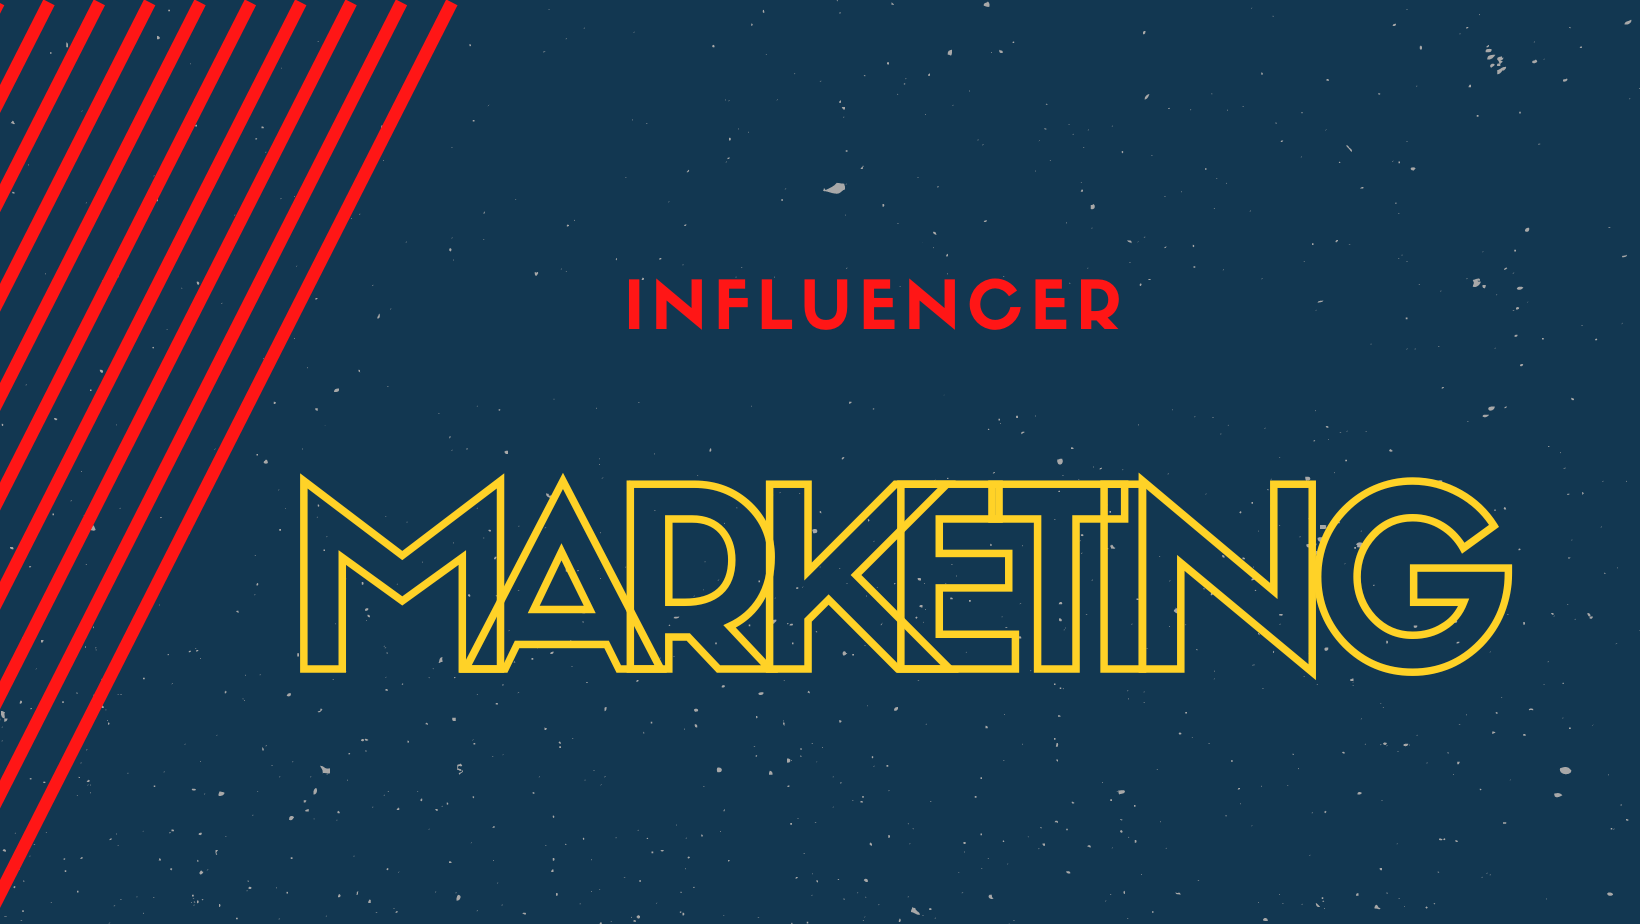 Blue background with red and yellow text for an article about Influencer Marketing.